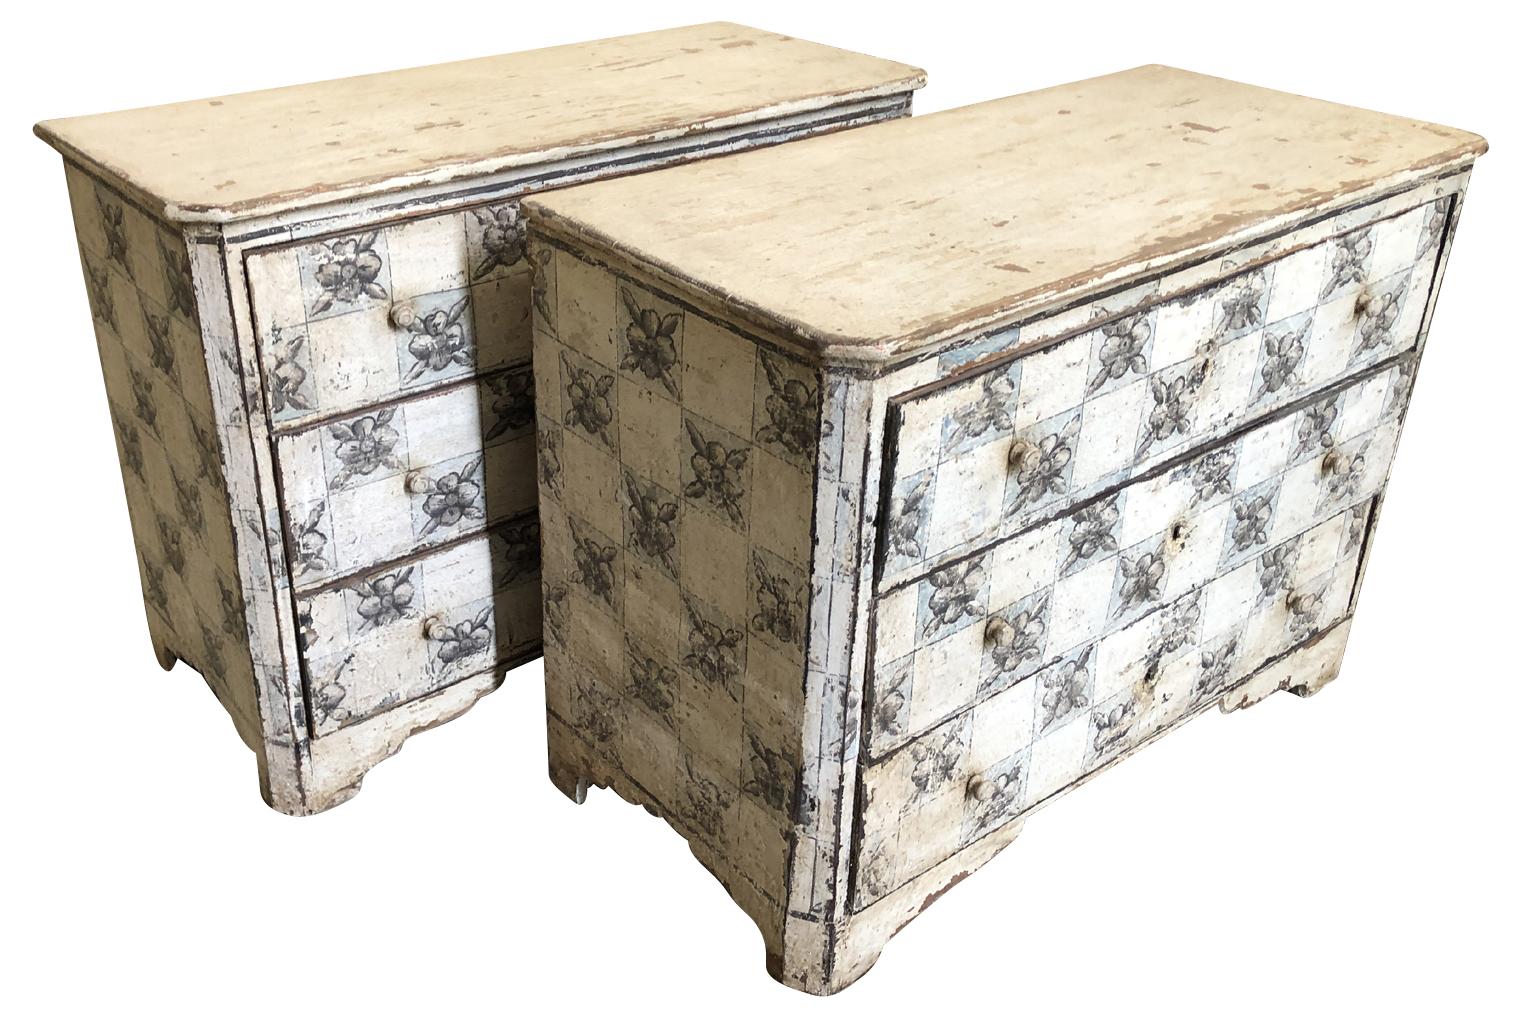 A sensational pair of late 19th century painted commodes from Spain. Great construction with three drawers over bracket feet. The painted finish is wonderful with a great motif and texture. Great as bedside cabinets or converted into vanities. One